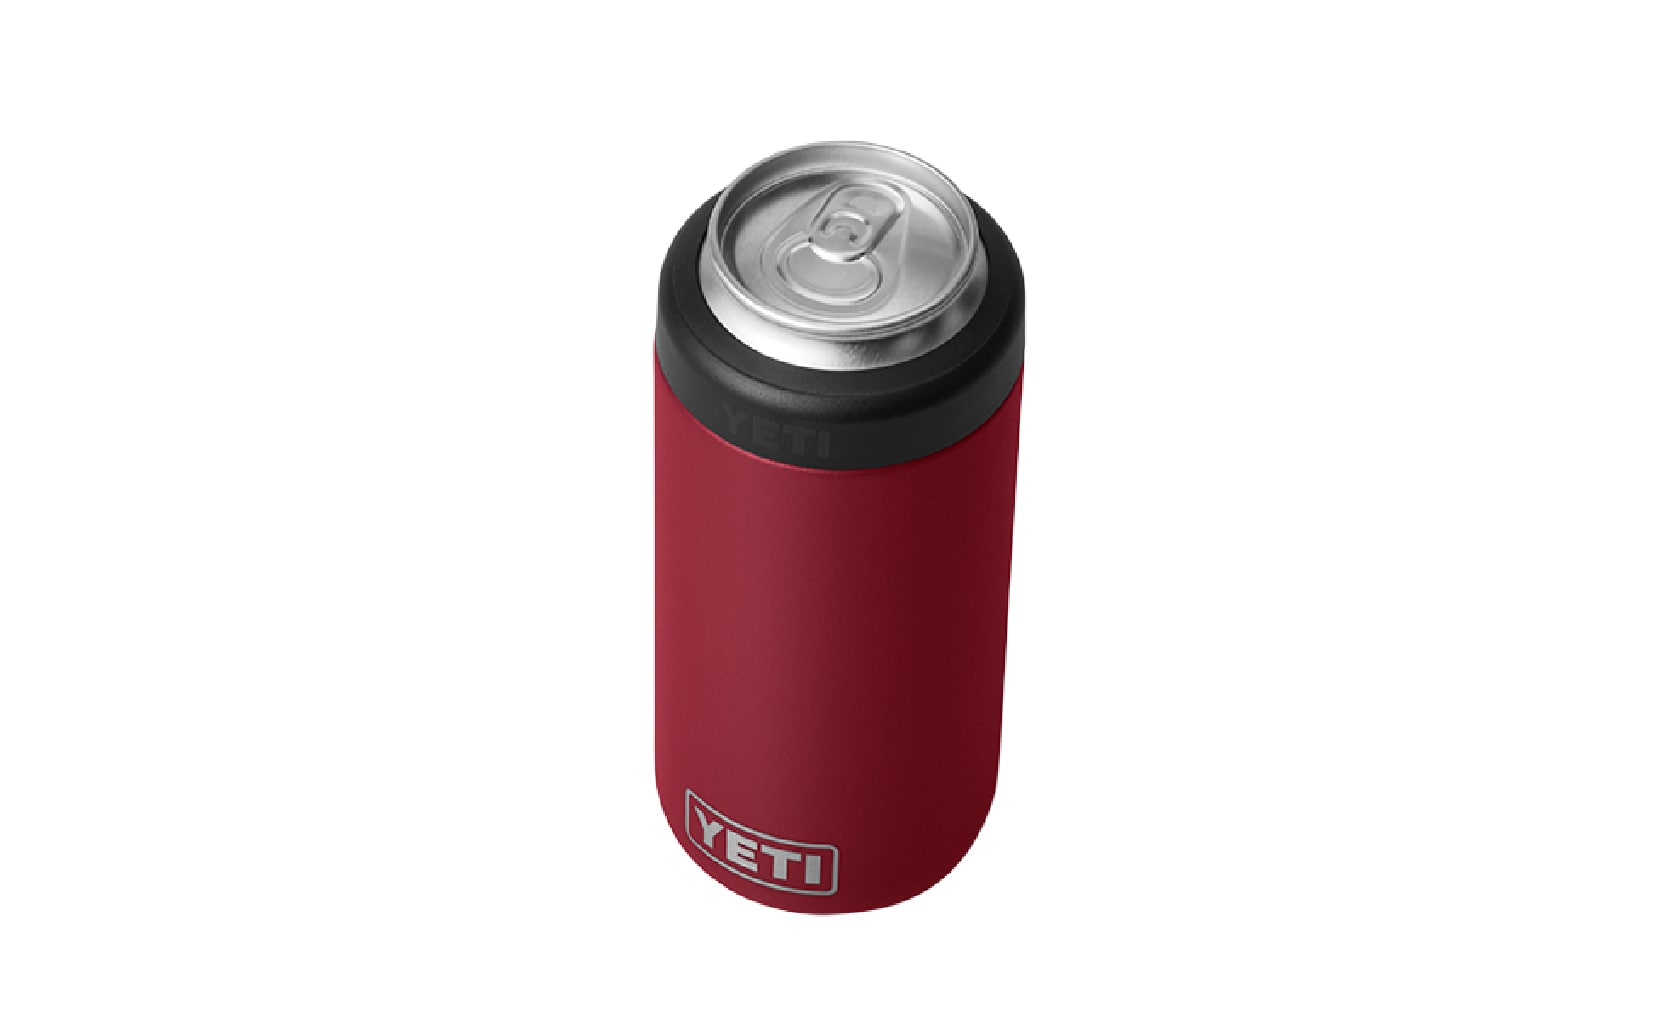 YETI Rambler 16 oz. Colster Tall Can Insulator for Tallboys & 16 oz. Cans